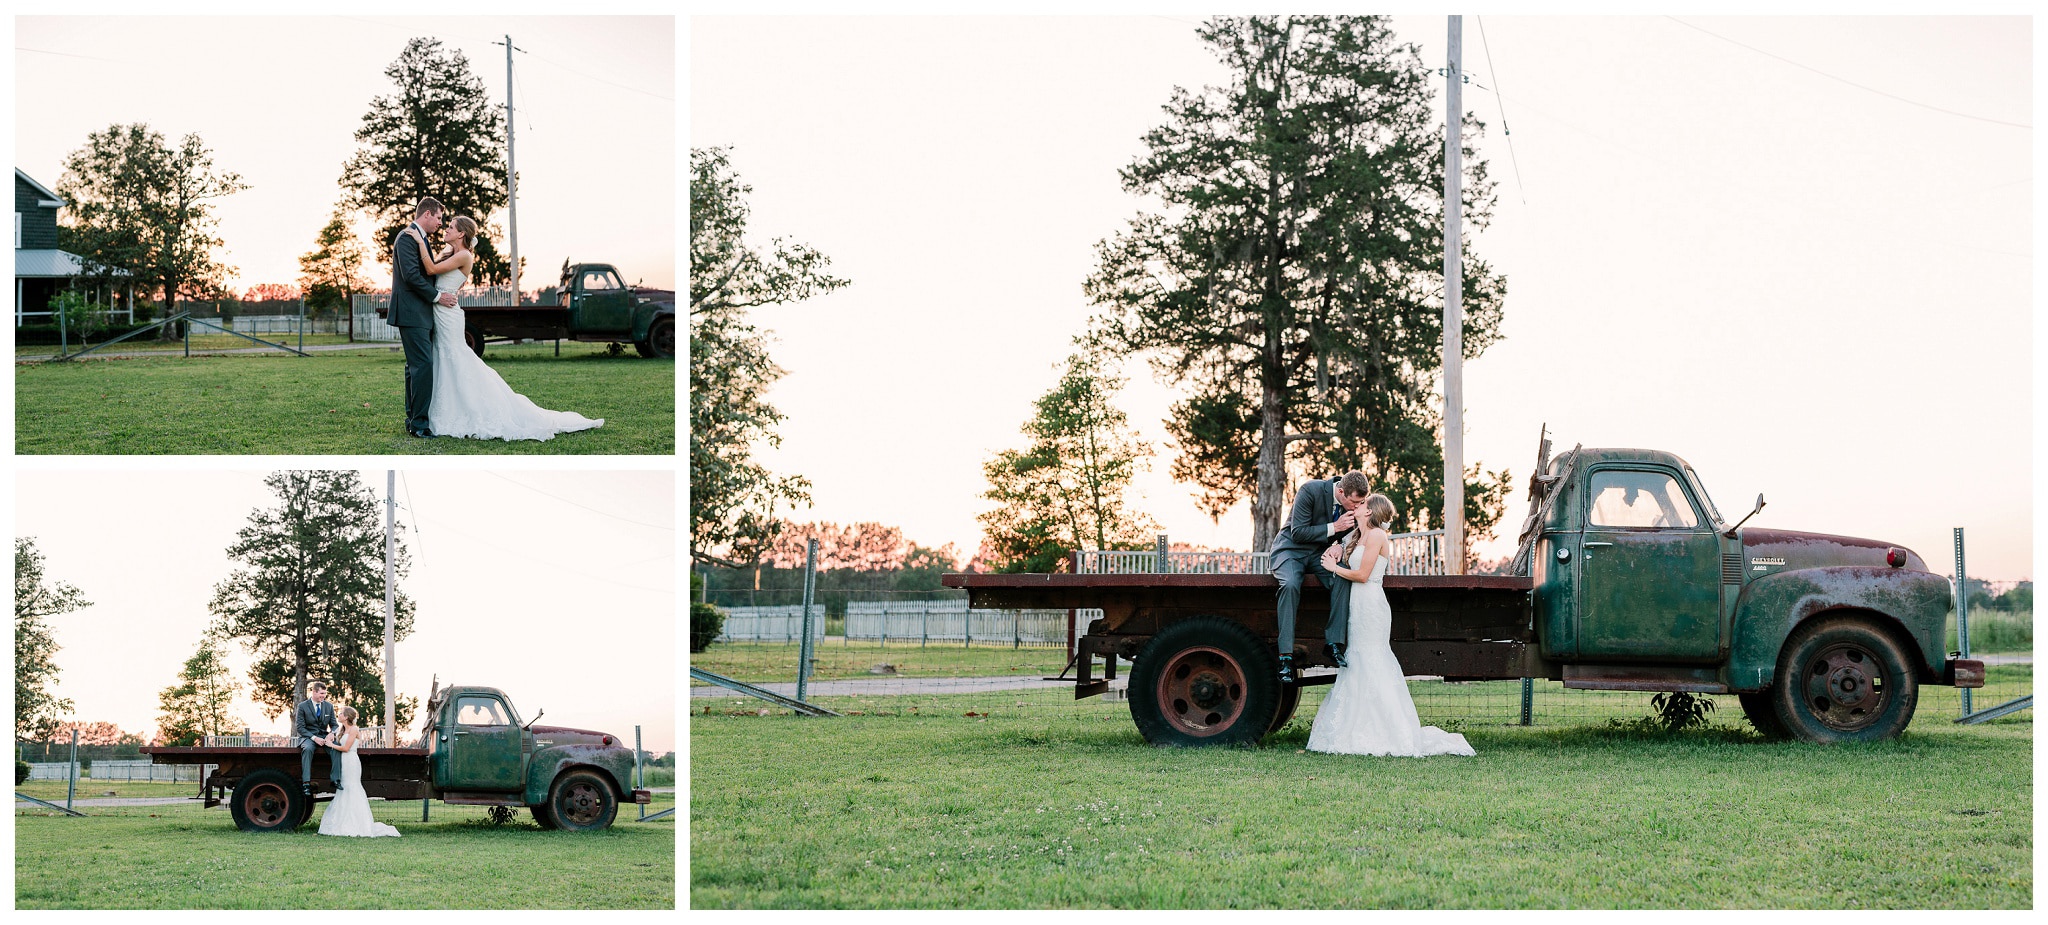 Bride, groom and an antique truck